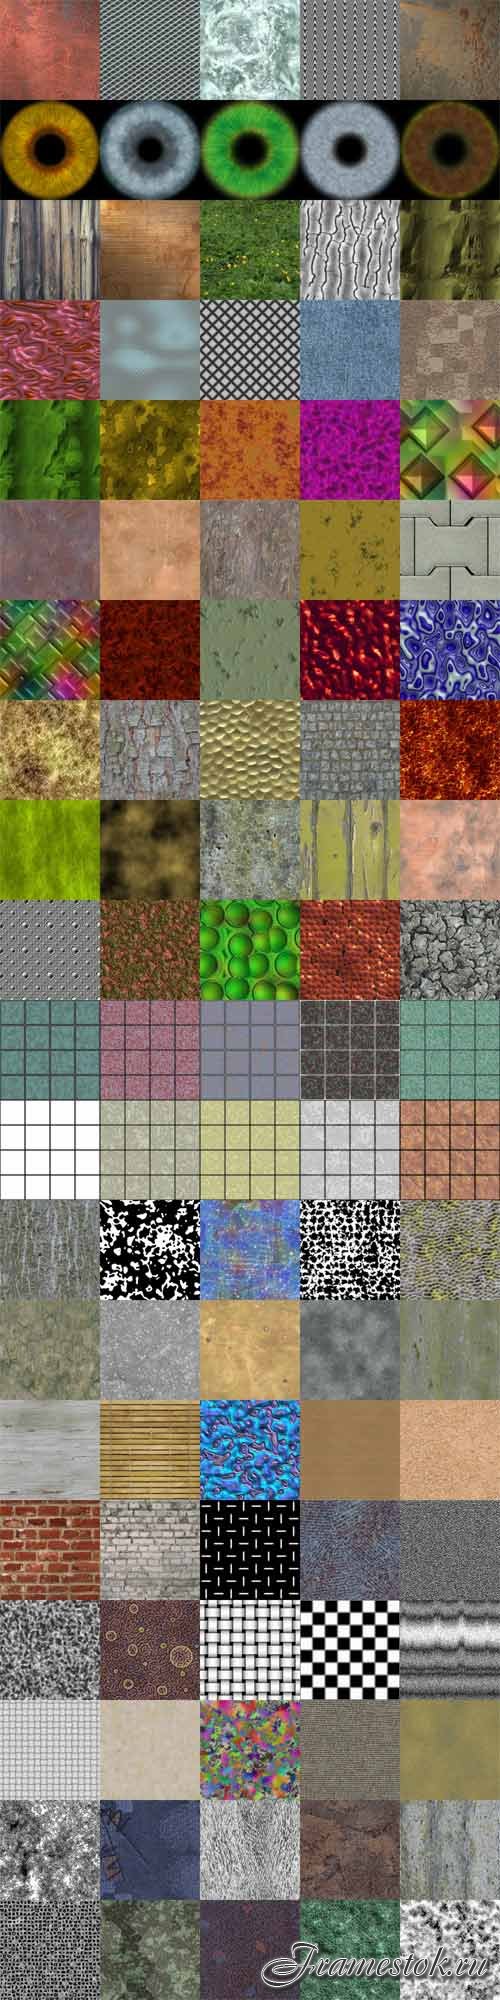 FrmTR Texture PacKet